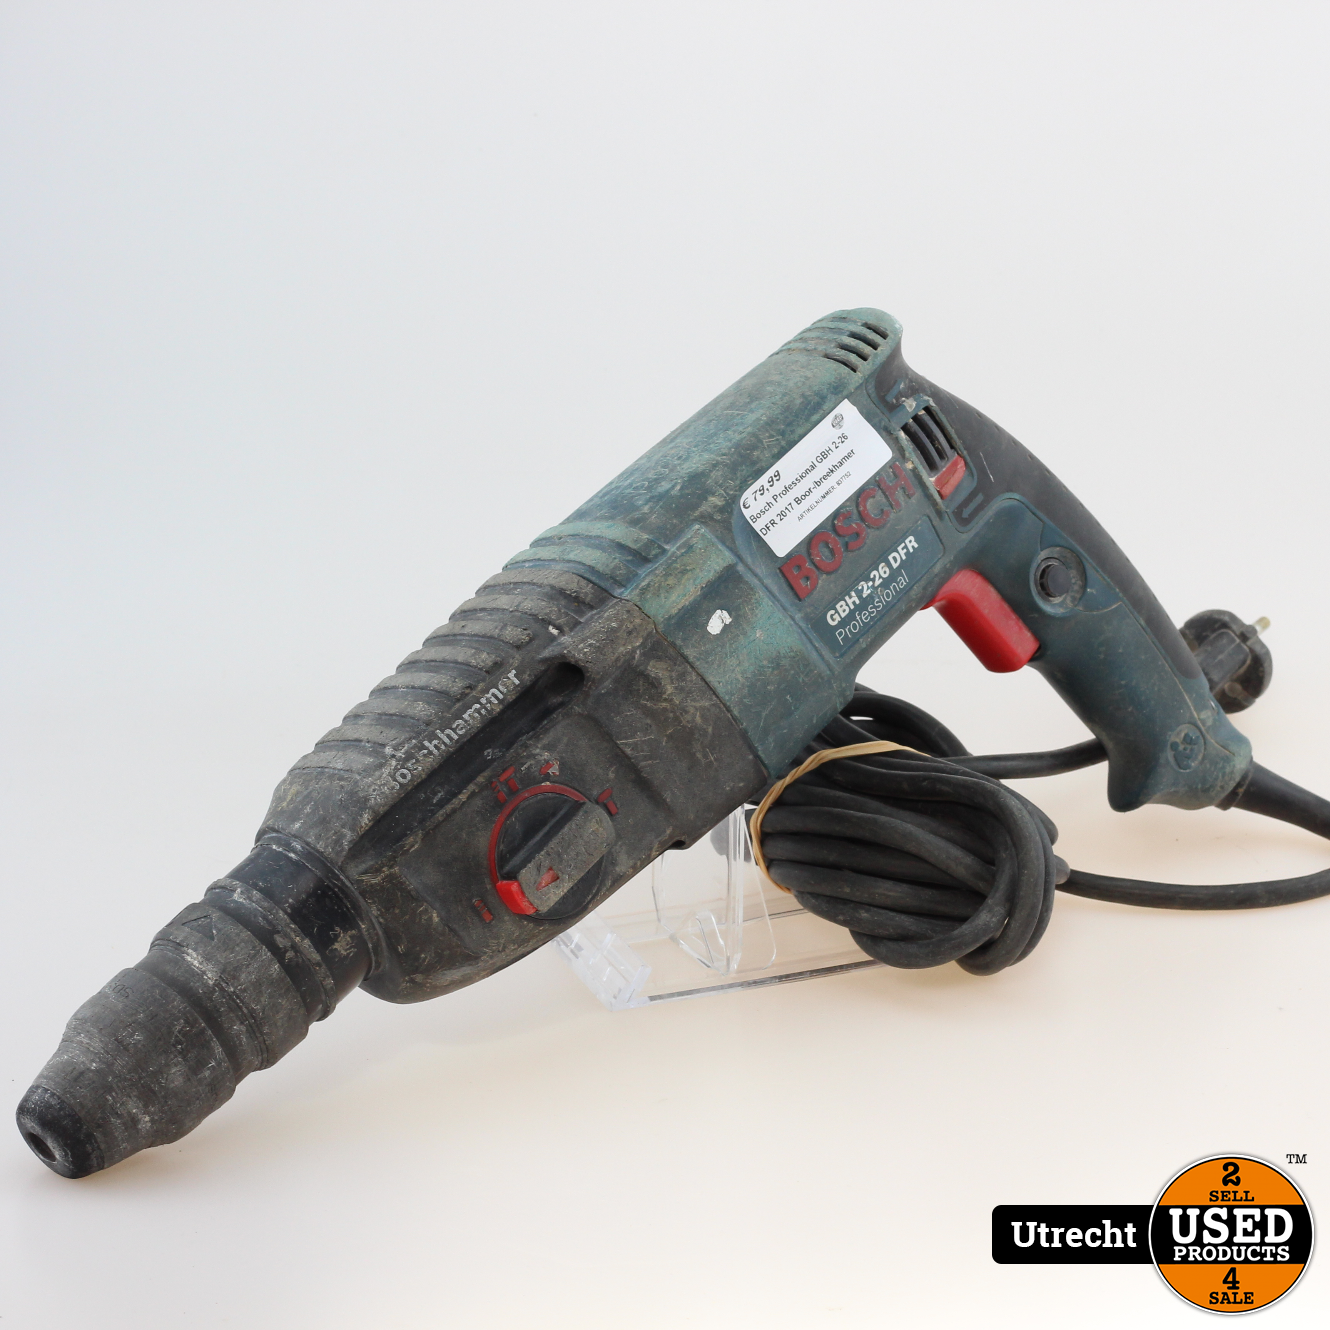 Bosch Professional GBH 2-26 2017 Boor-/breekhamer Used Products